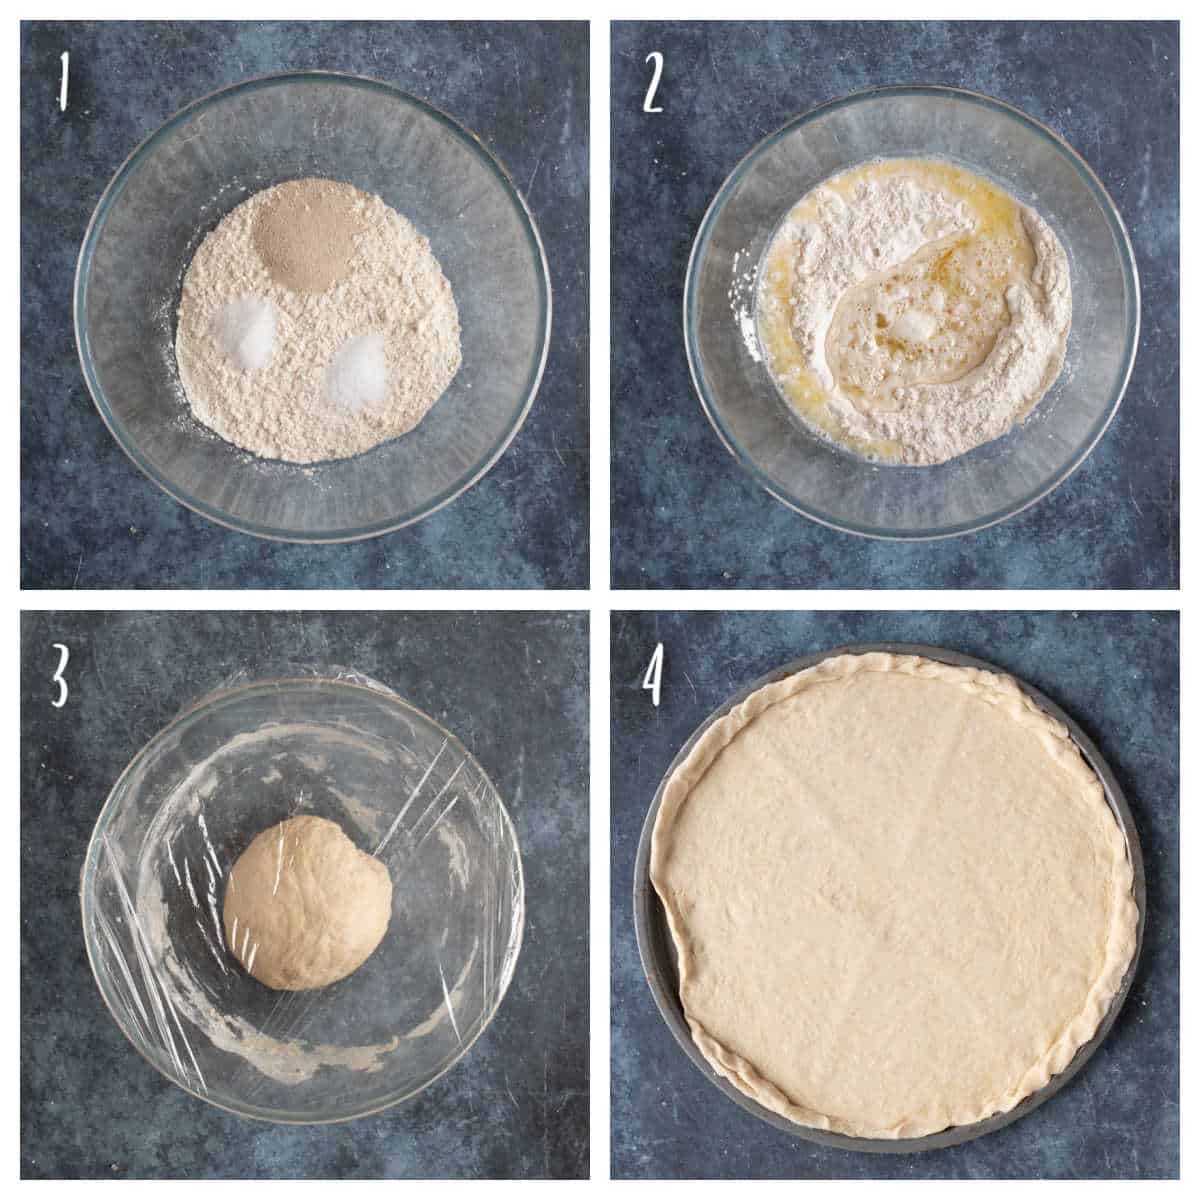 Step by step photo instructions for making homemade pizza dough.